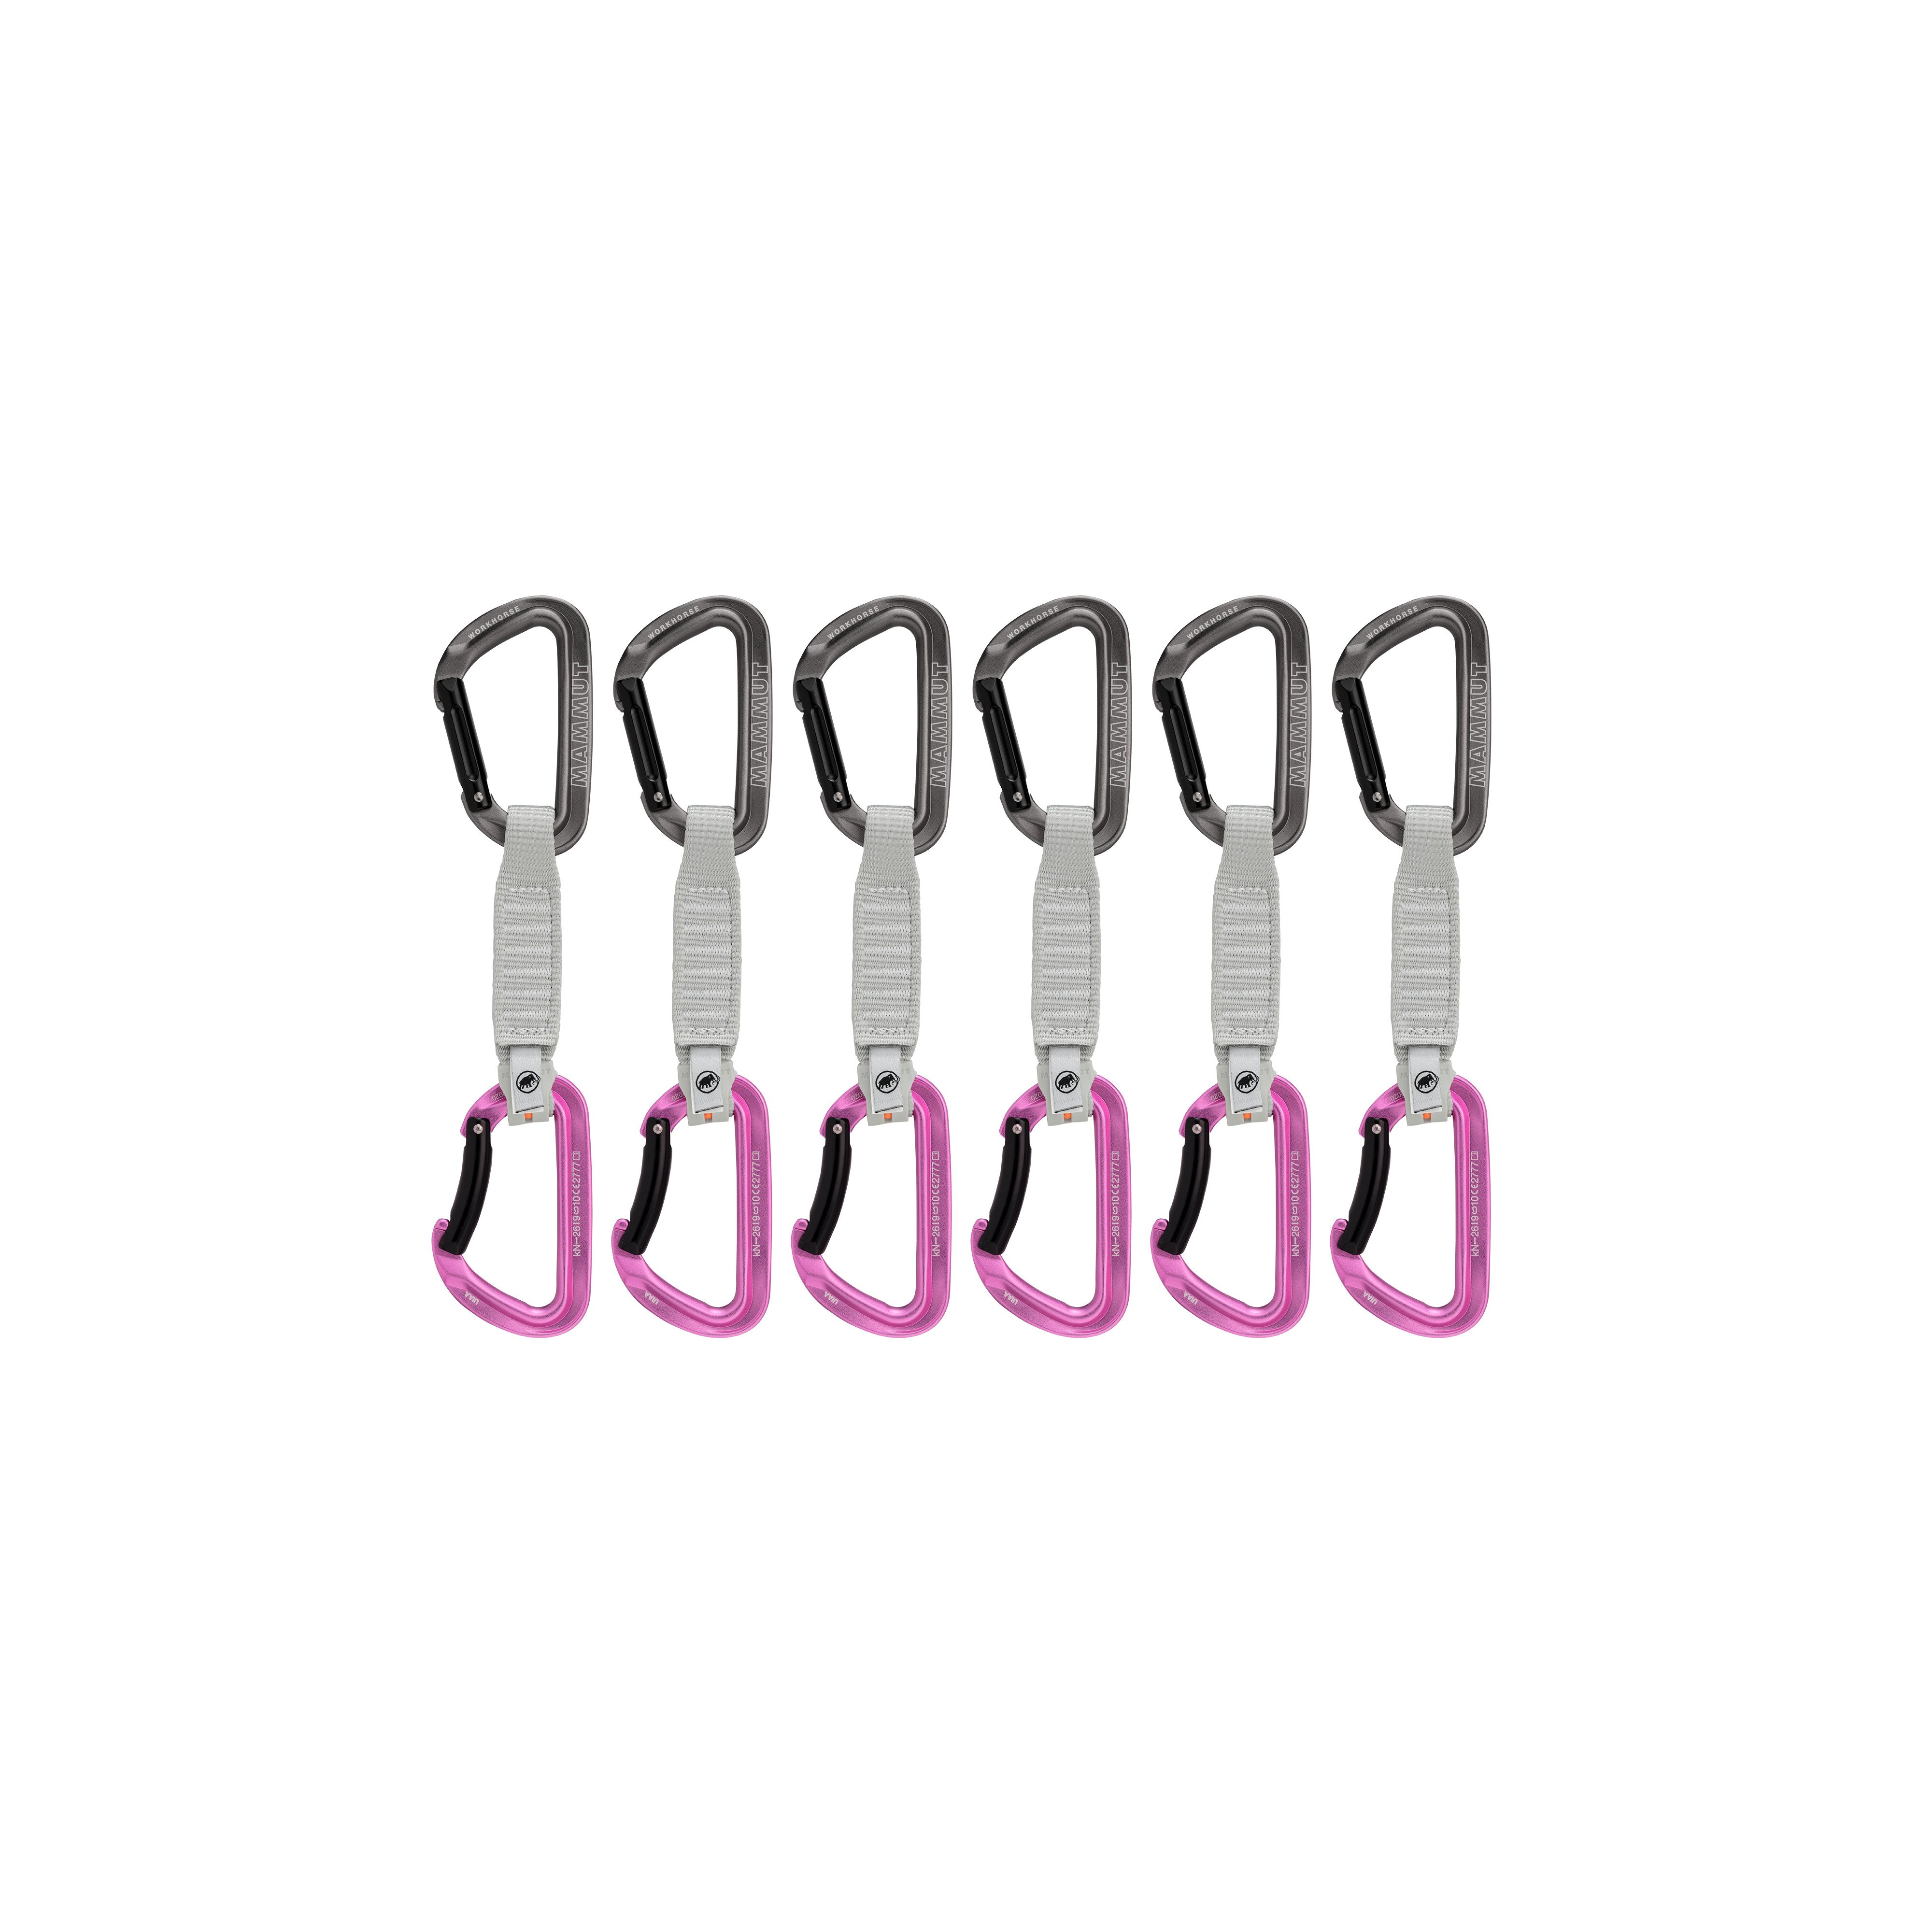 Workhorse Keylock 12 cm 6-Pack Quickdraws - grey-pink, 12 cm product image